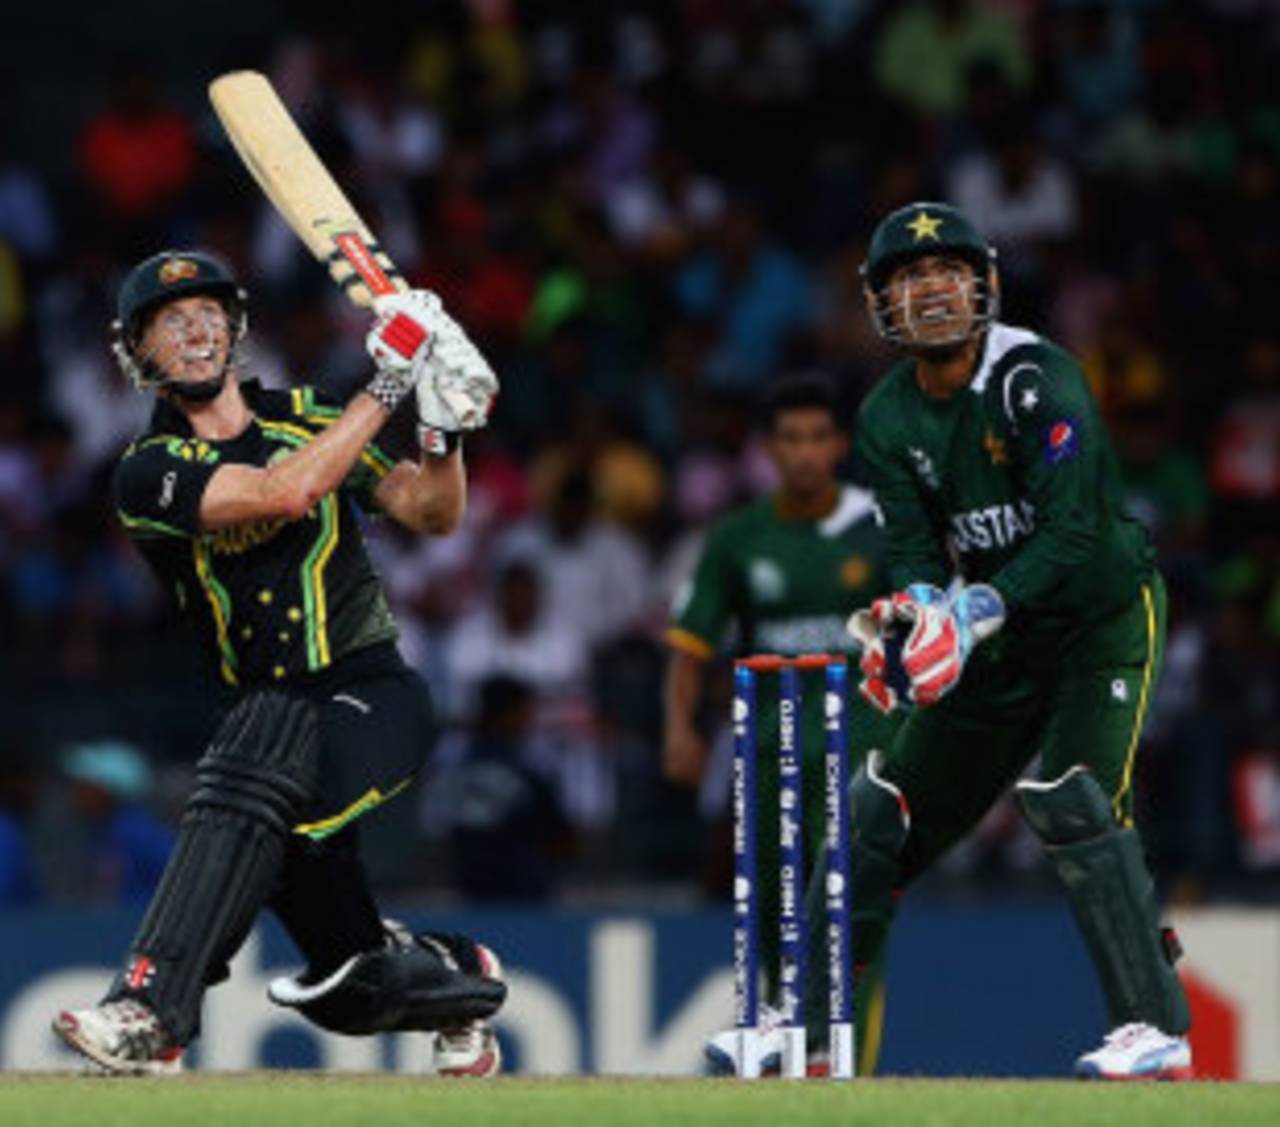 Captain George Bailey tried to revitalise his side's chase, Australia v Pakistan, Super Eights, World Twenty20 2012, Colombo, October 2, 2012